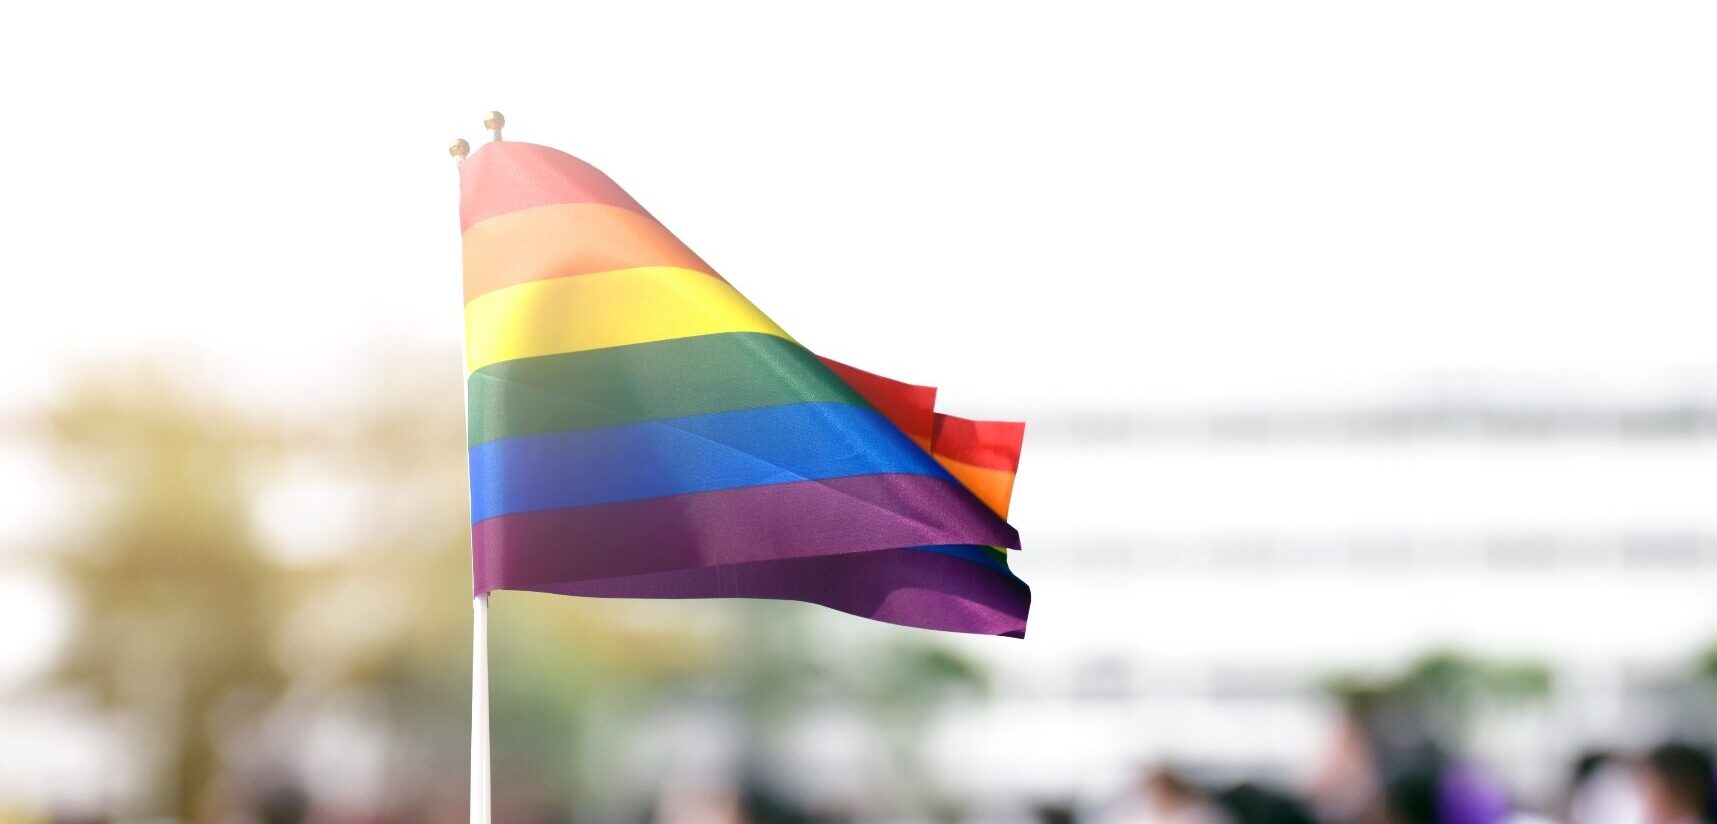 Calls For Federal Government To Secure Protections For LGBTQ Staff And Students In Religious Schools